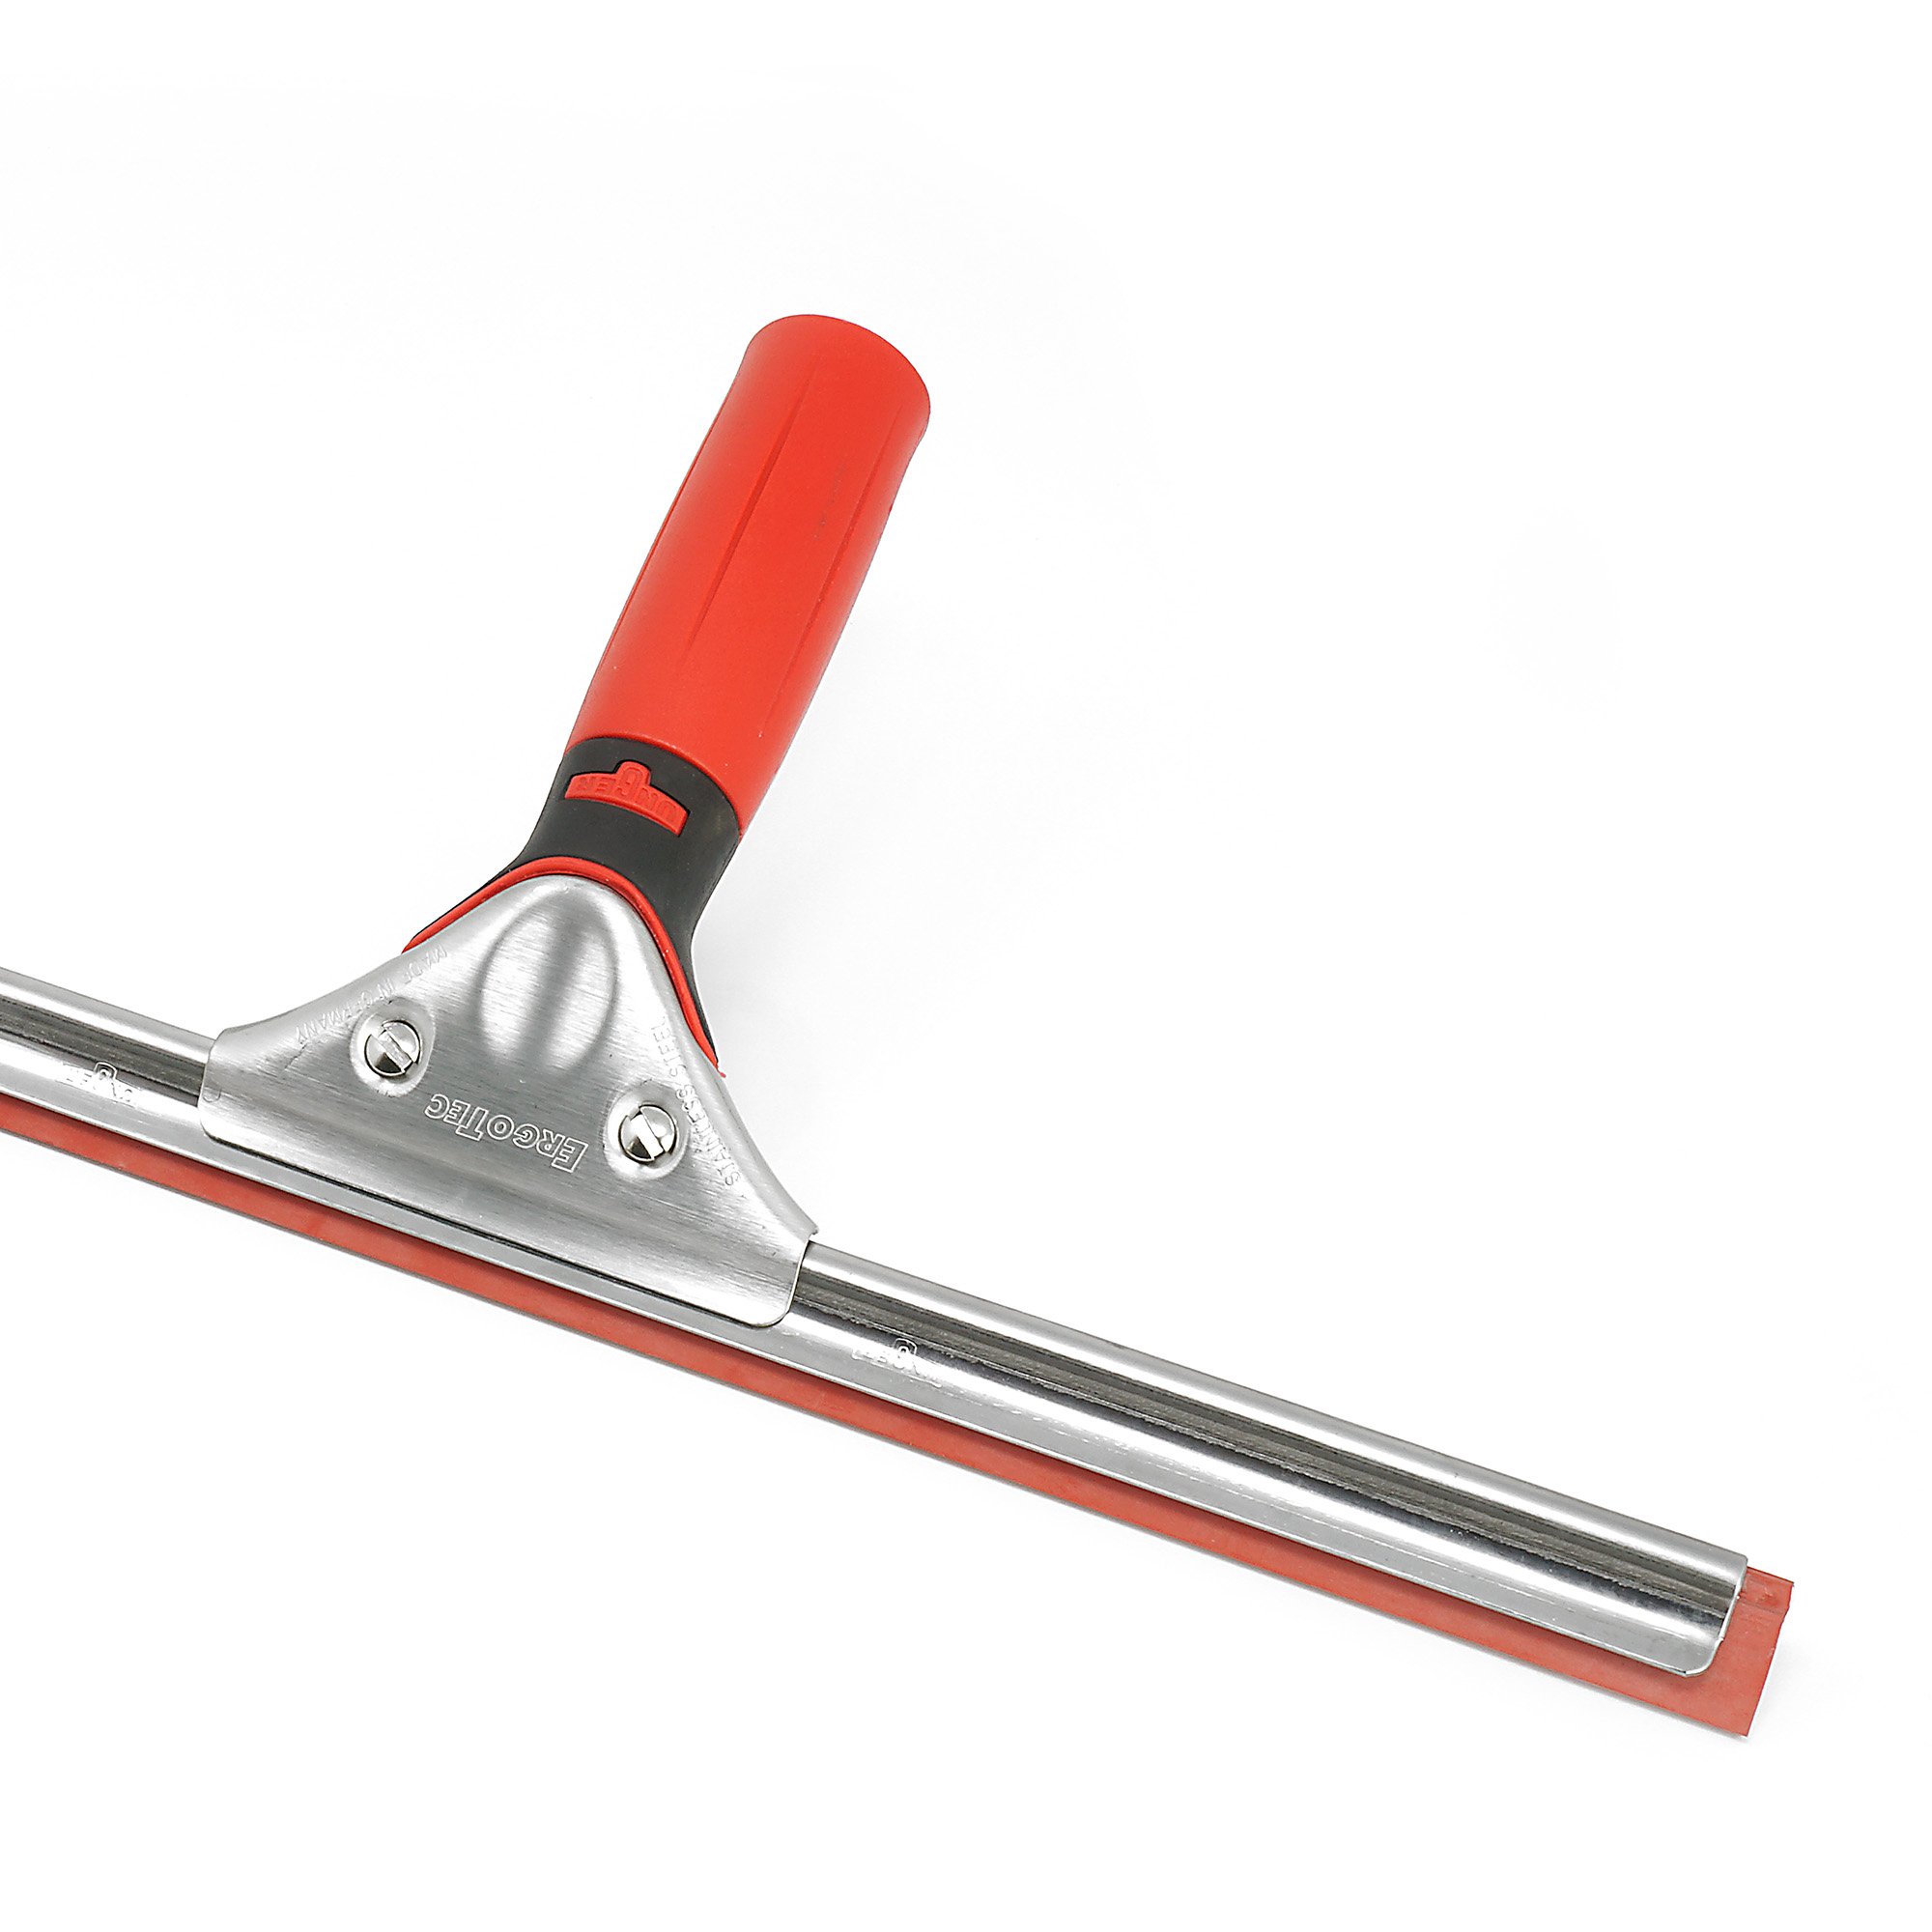 FaceLift Fireblade Window Cleaning Squeegee